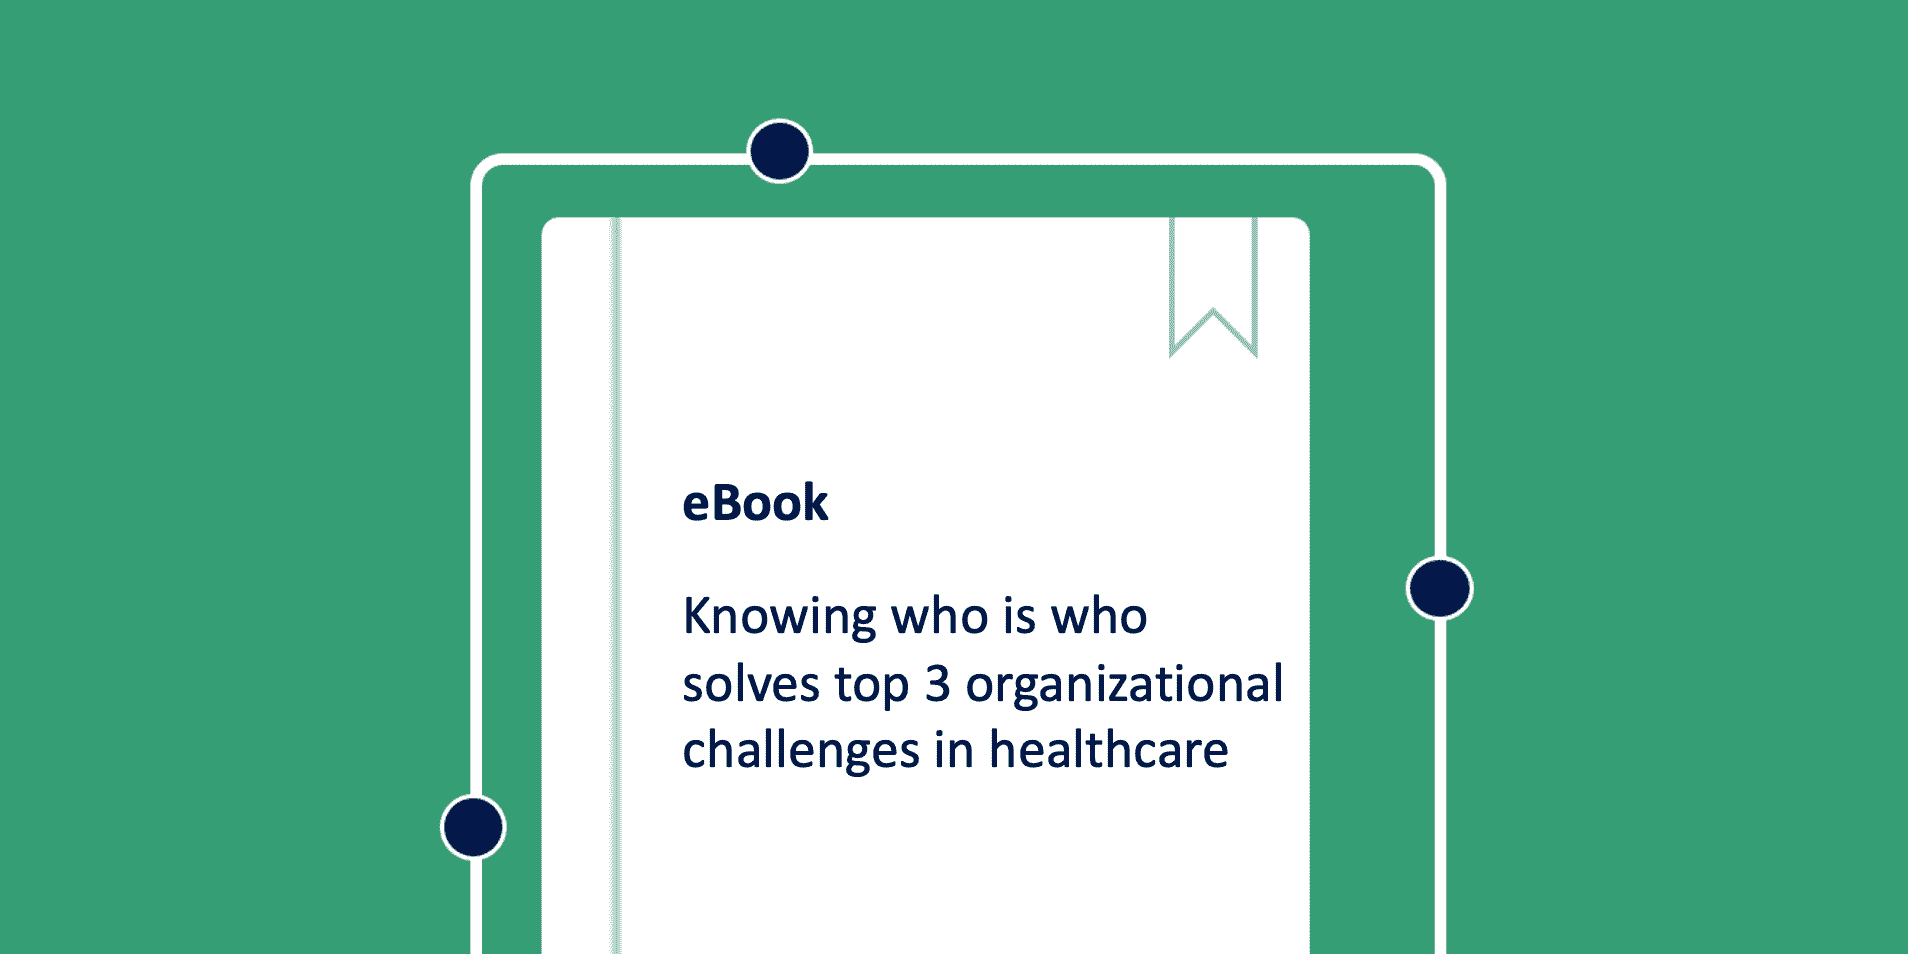 eBook: Knowing who is who™ solves top 3 organizational challenges in healthcare